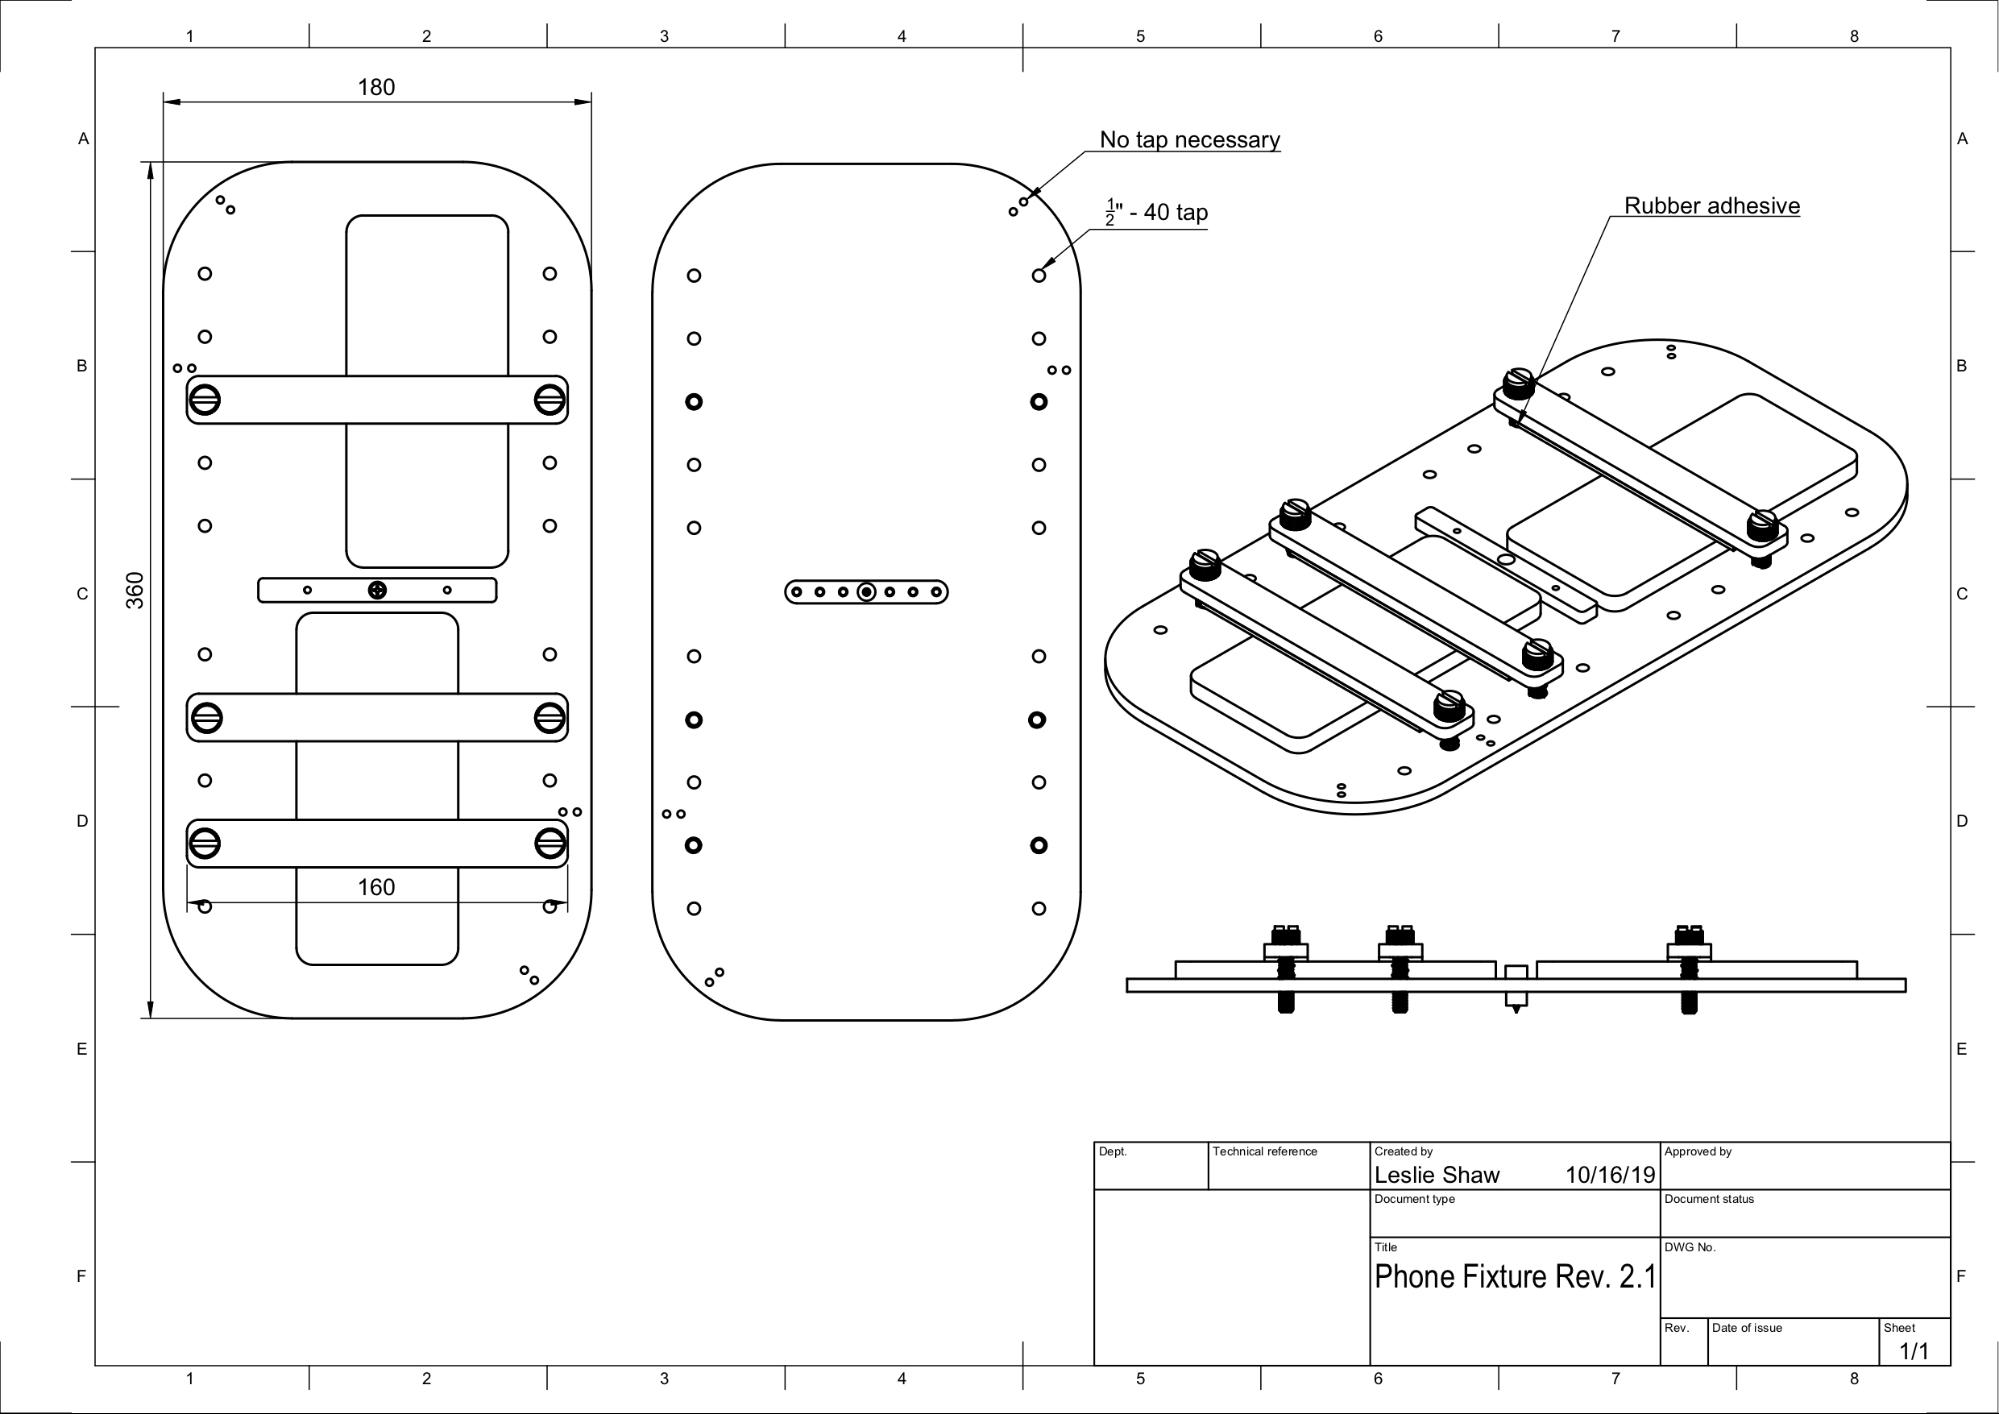 CAD drawing of phone fixture